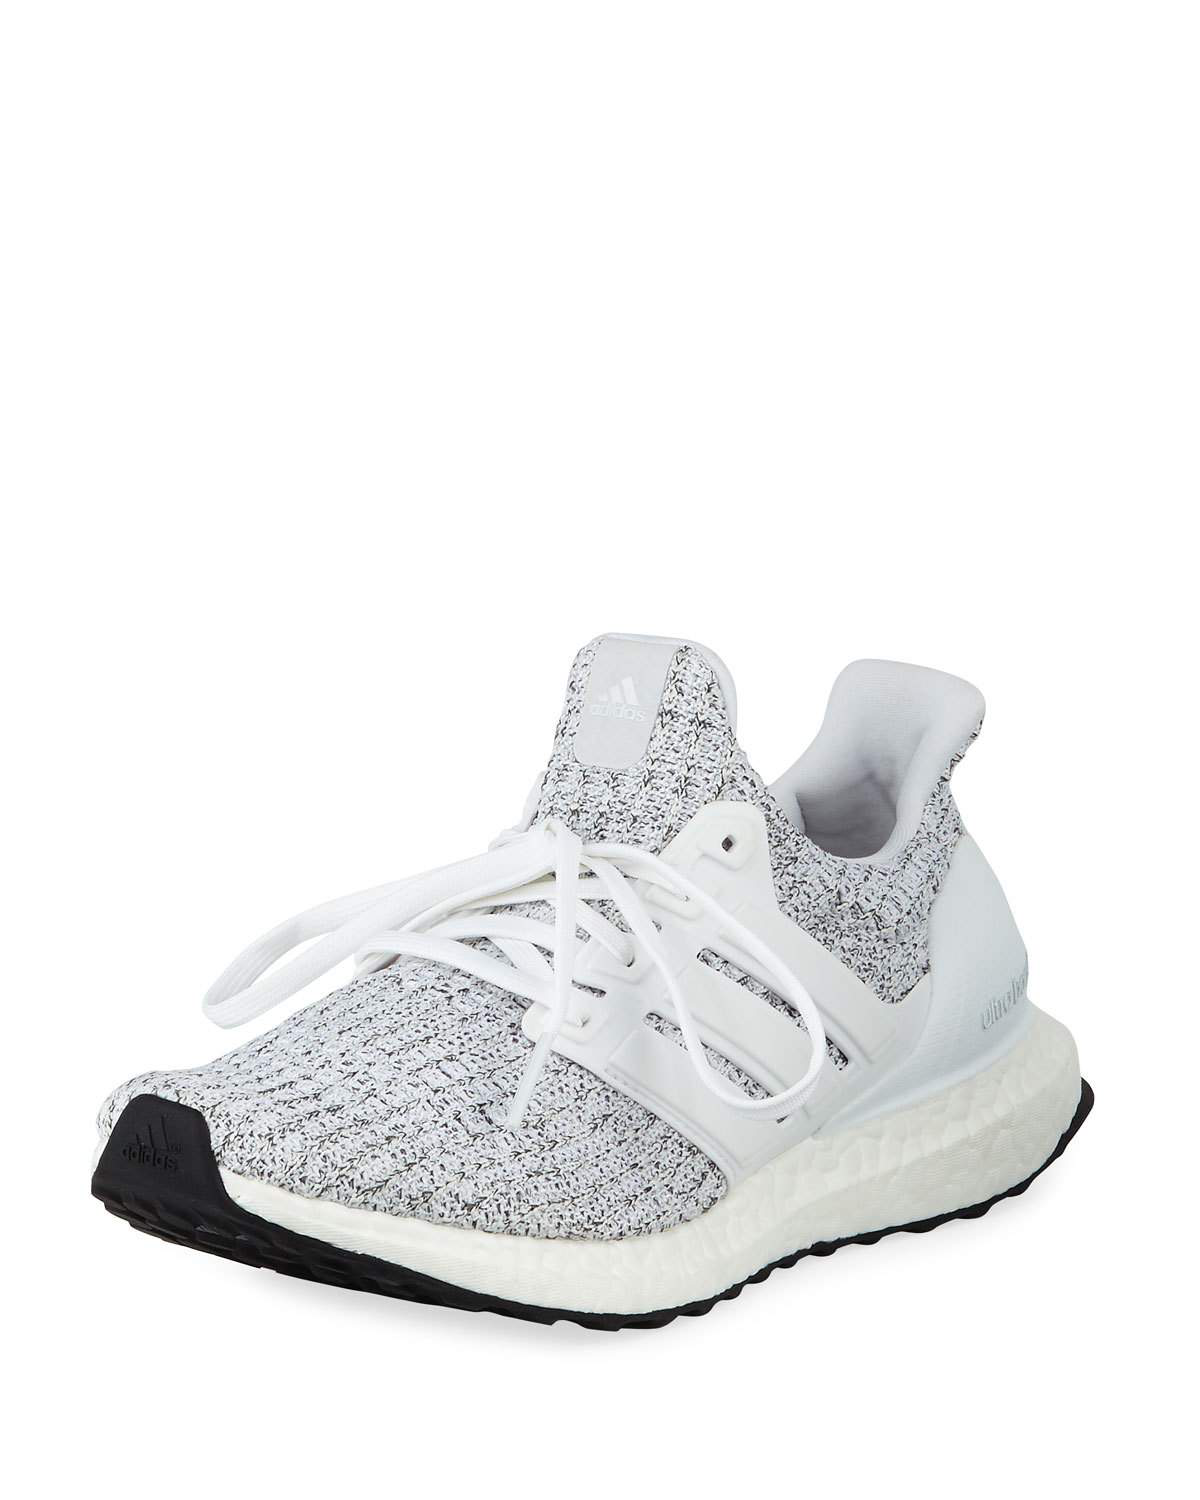 Adidas Ultra Boost sneakers price in Doha Qatar Pricena